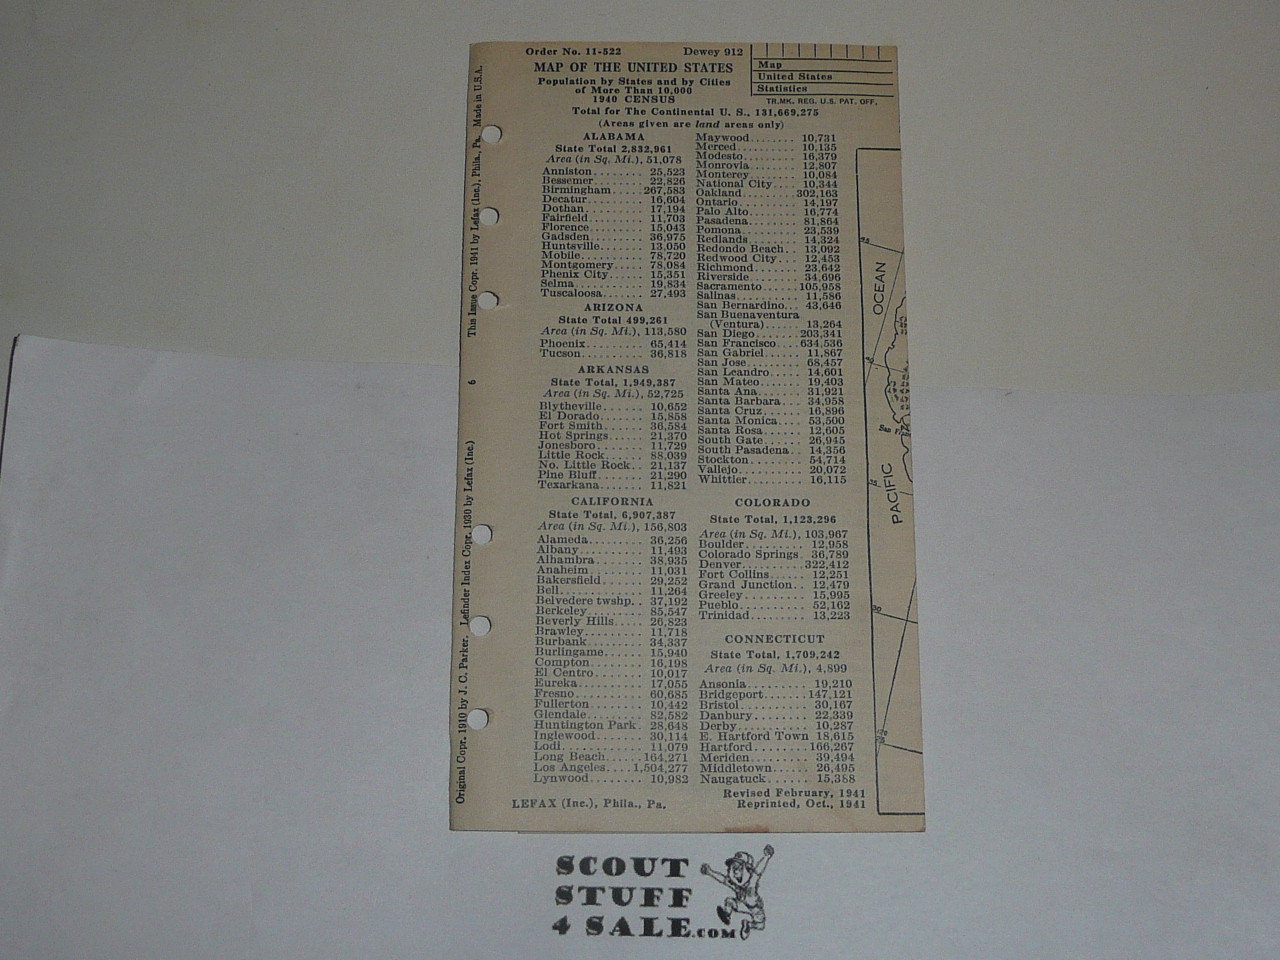 Lefax Boy Scout Fieldbook Insert, Map of the United States, 1941